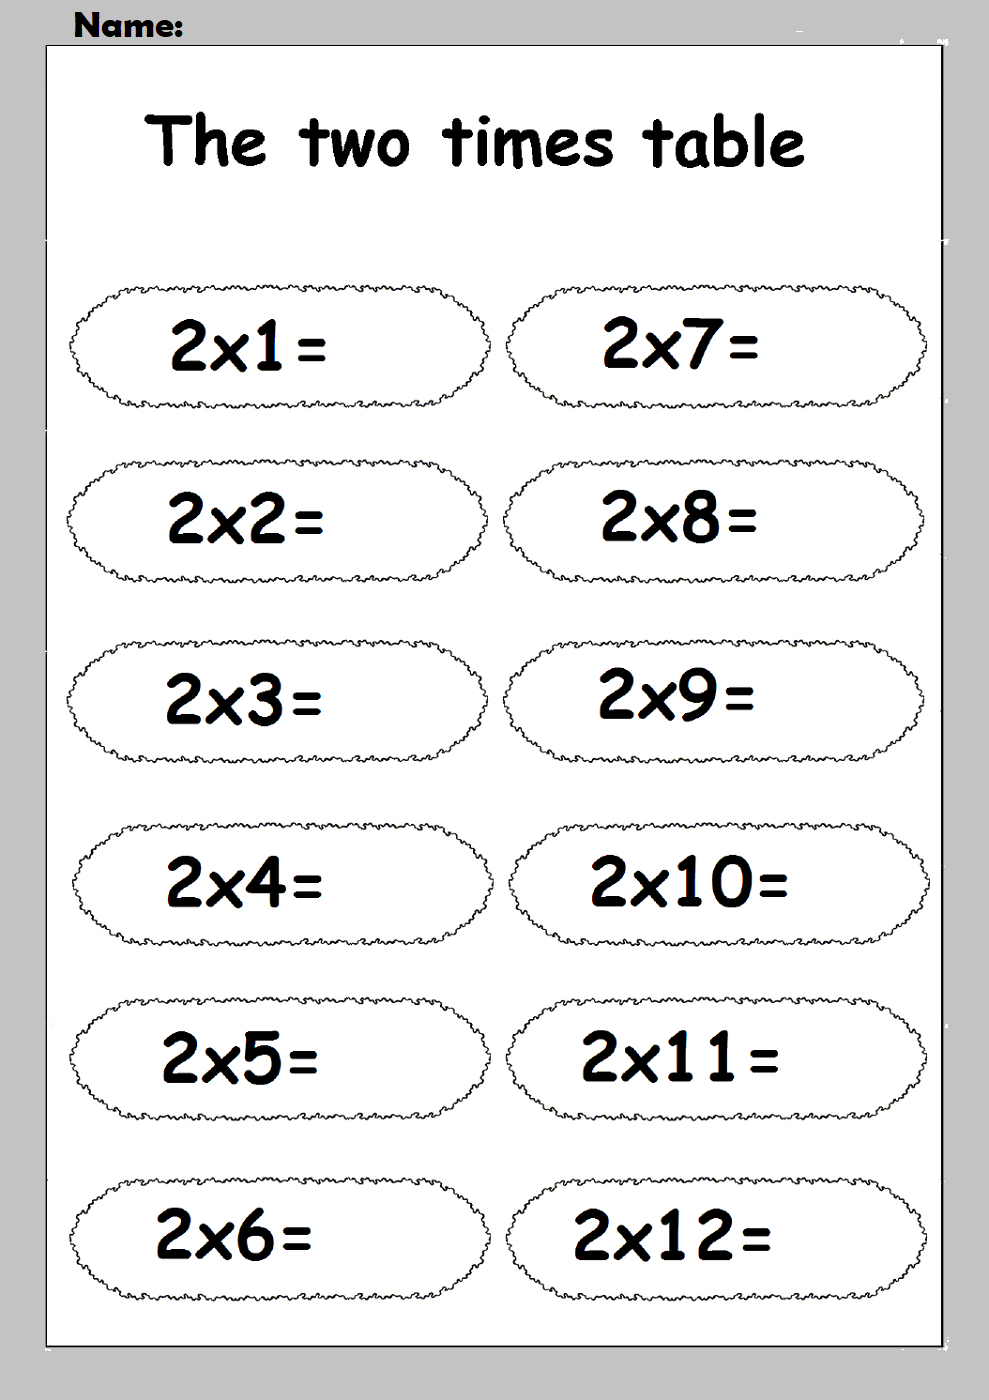 2 Times Table Worksheets | Printable Shelter with regard to Printable Practice Multiplication Tables